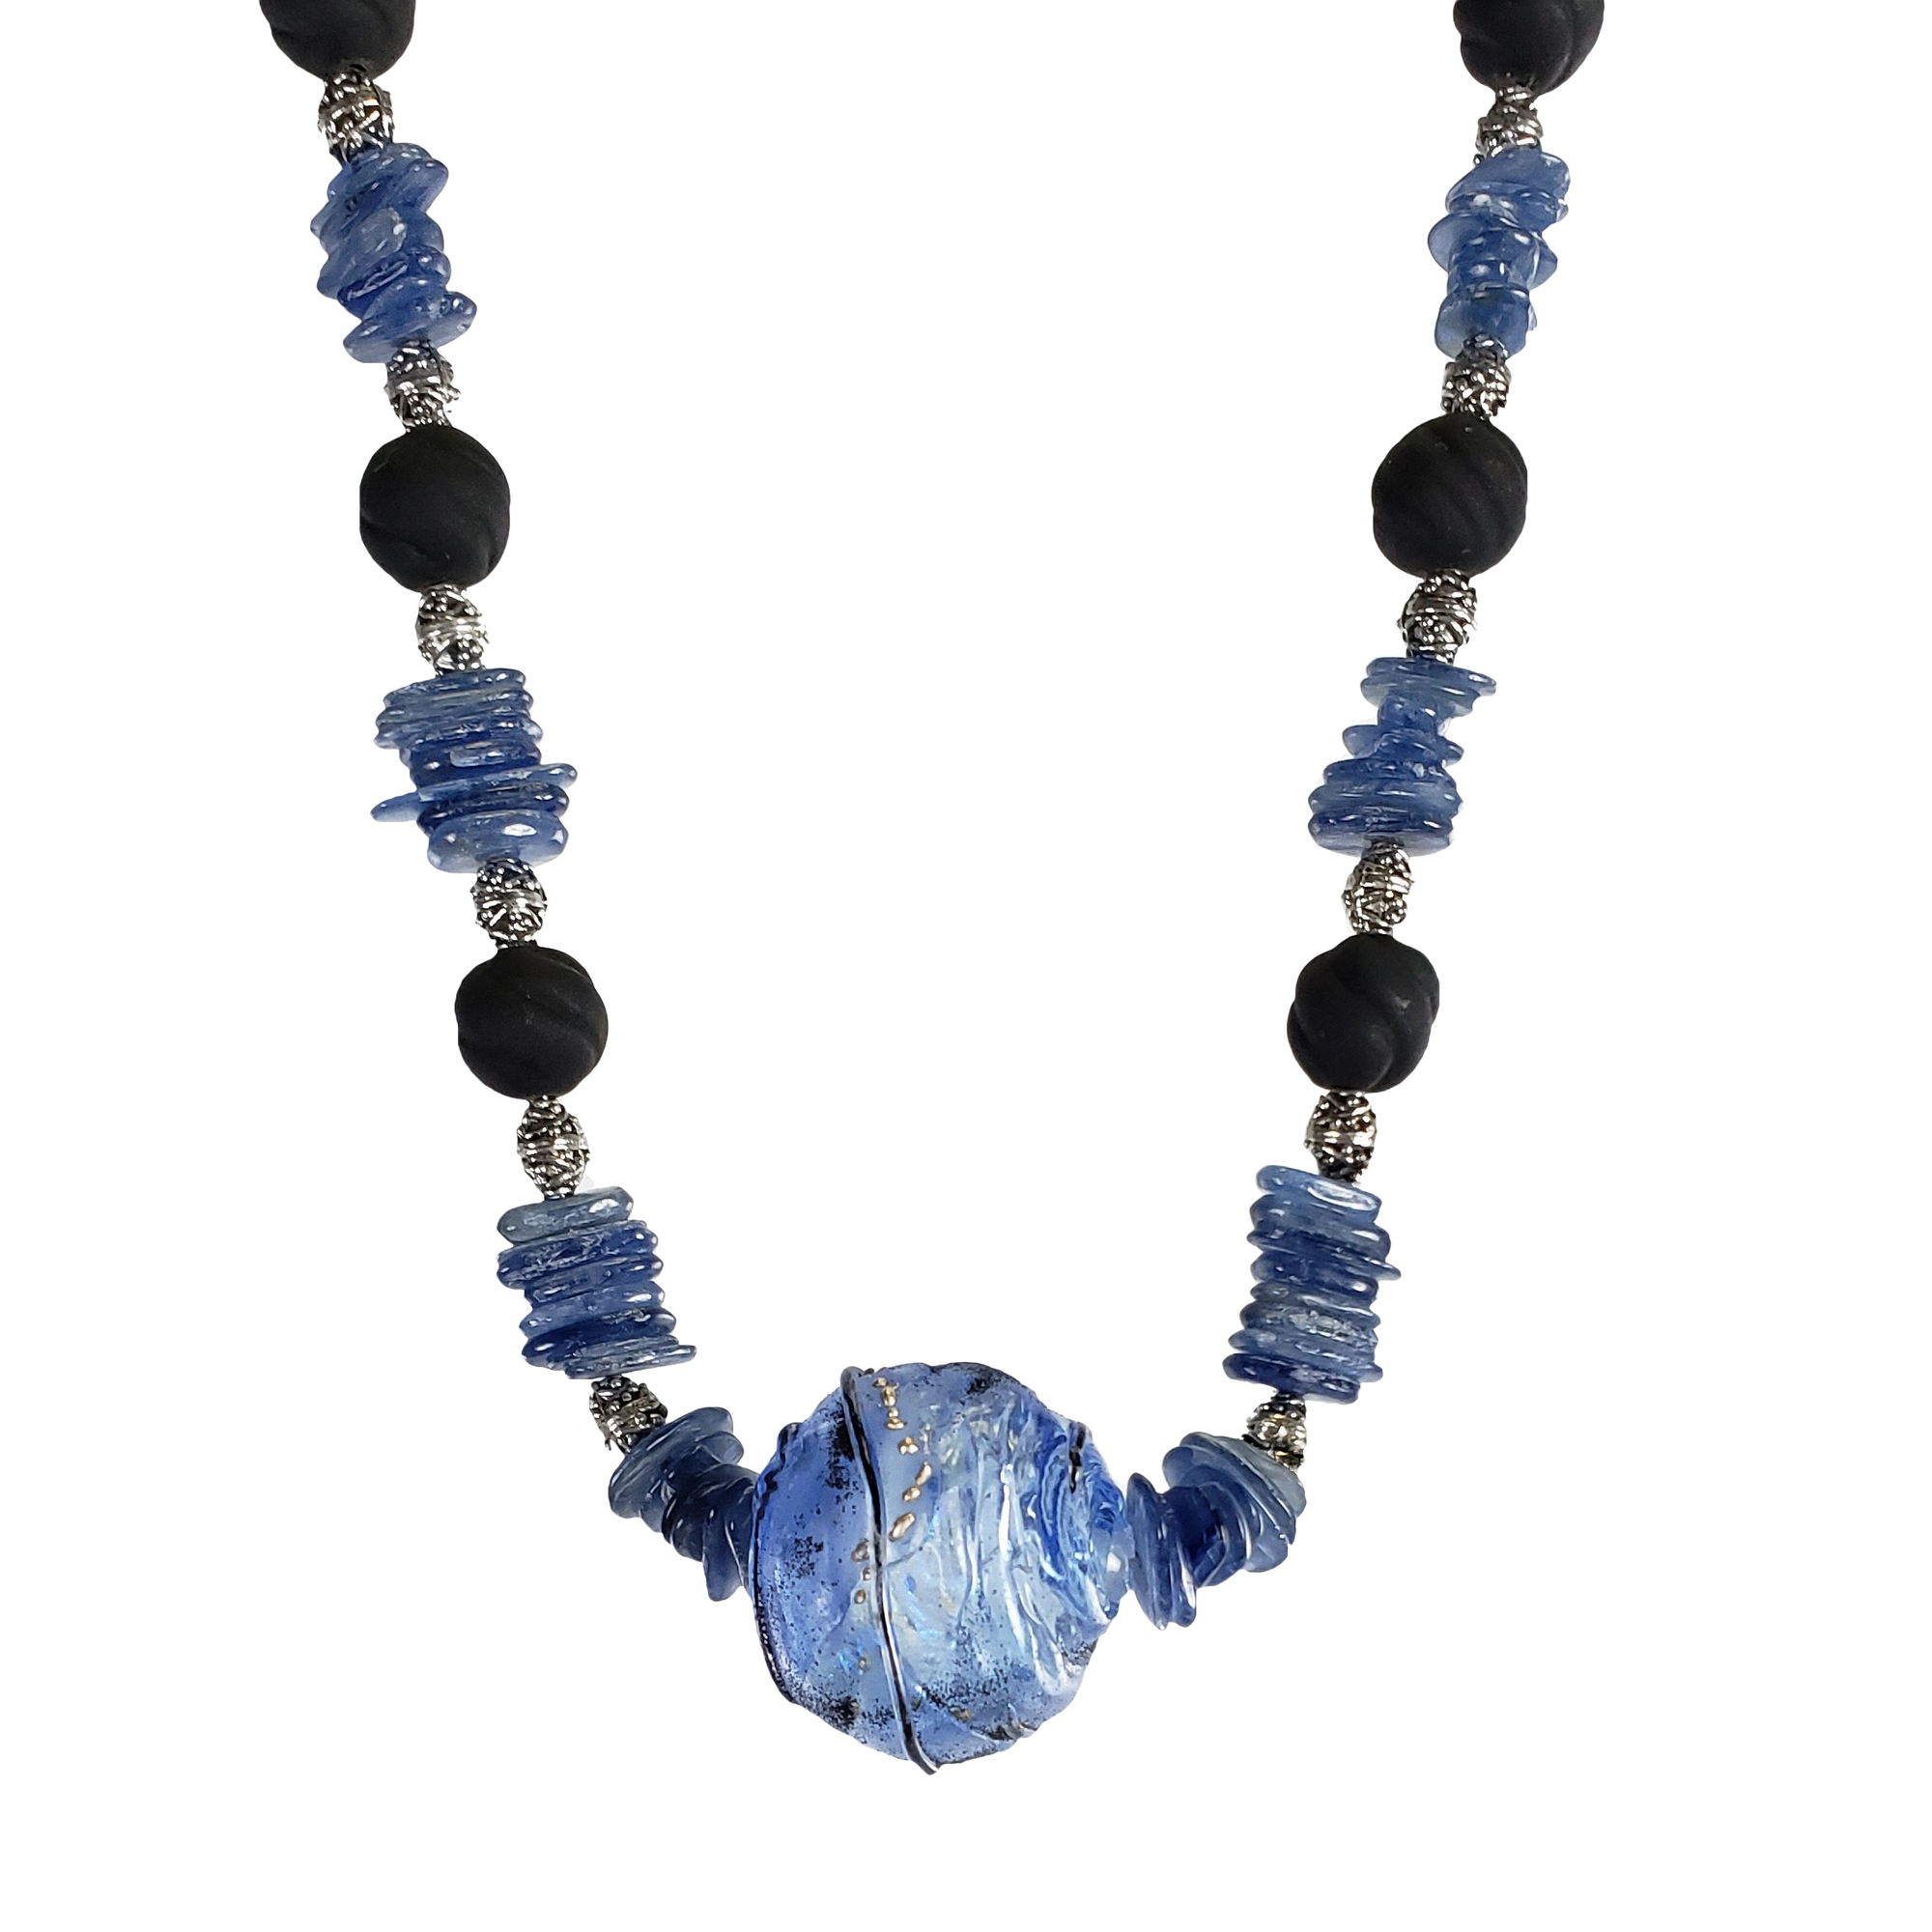 Kyanite Necklace - Becker and SUV Glass